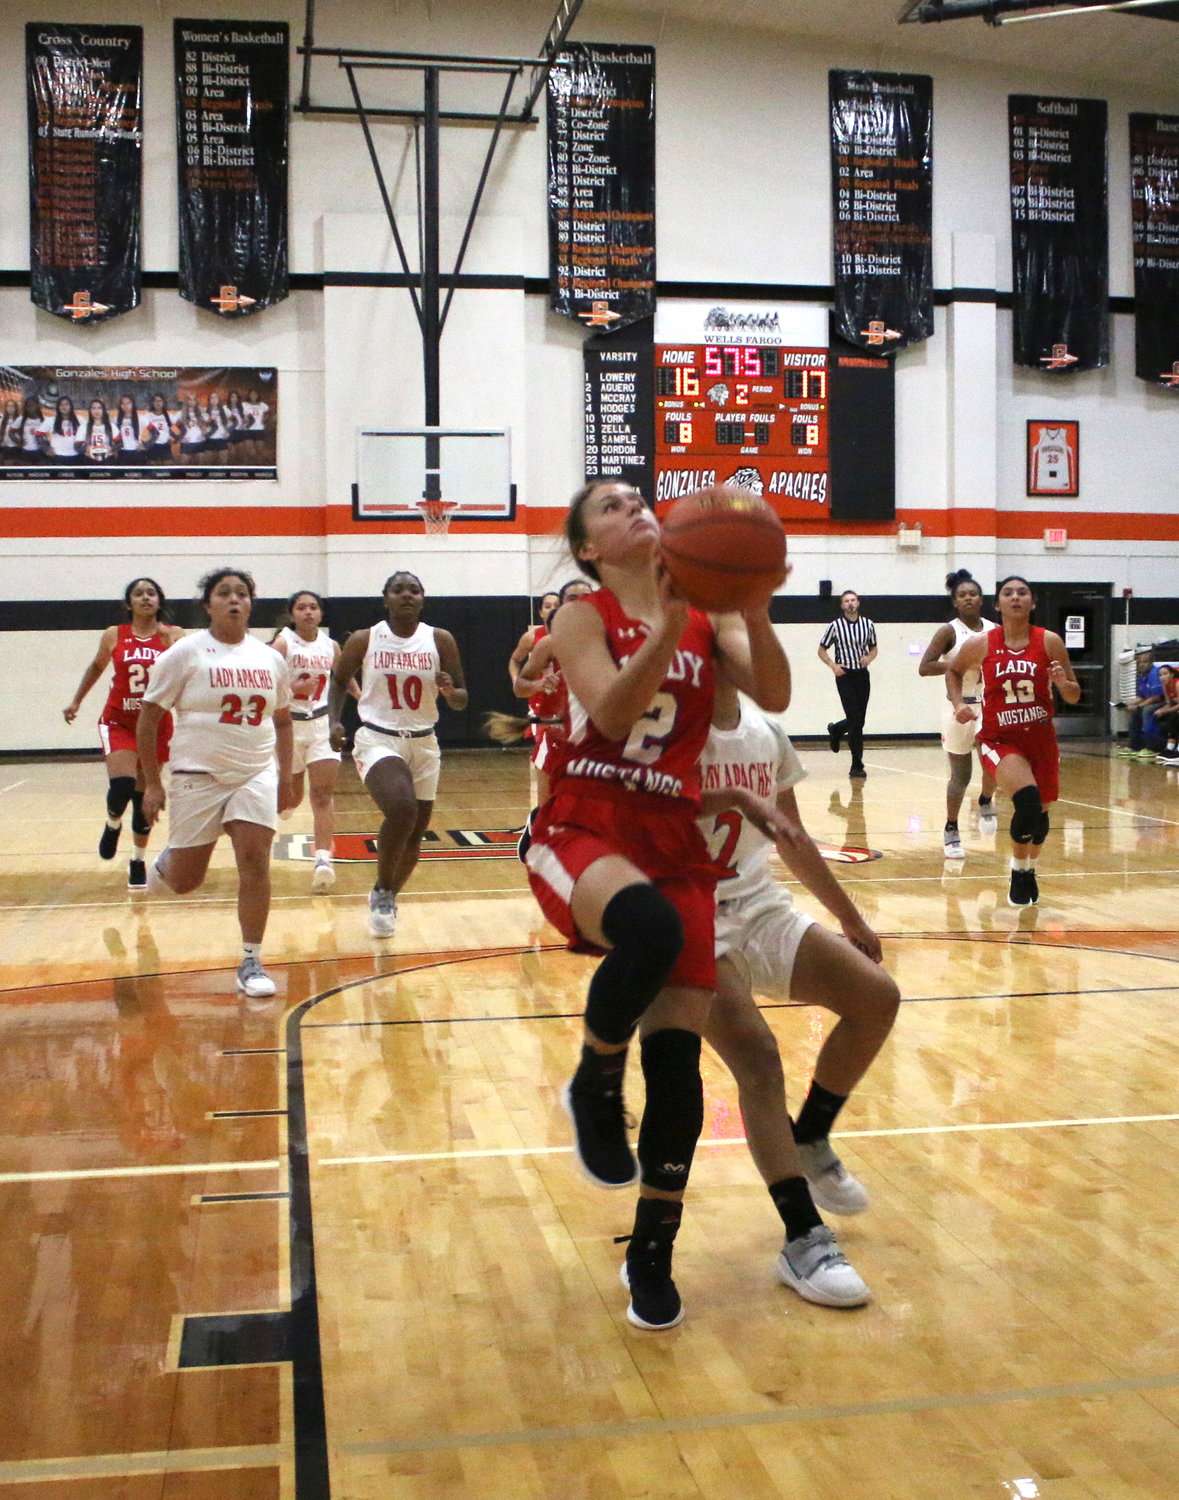 Greenlee Houseton drives to the hoop for a layup against the Lady Apaches.